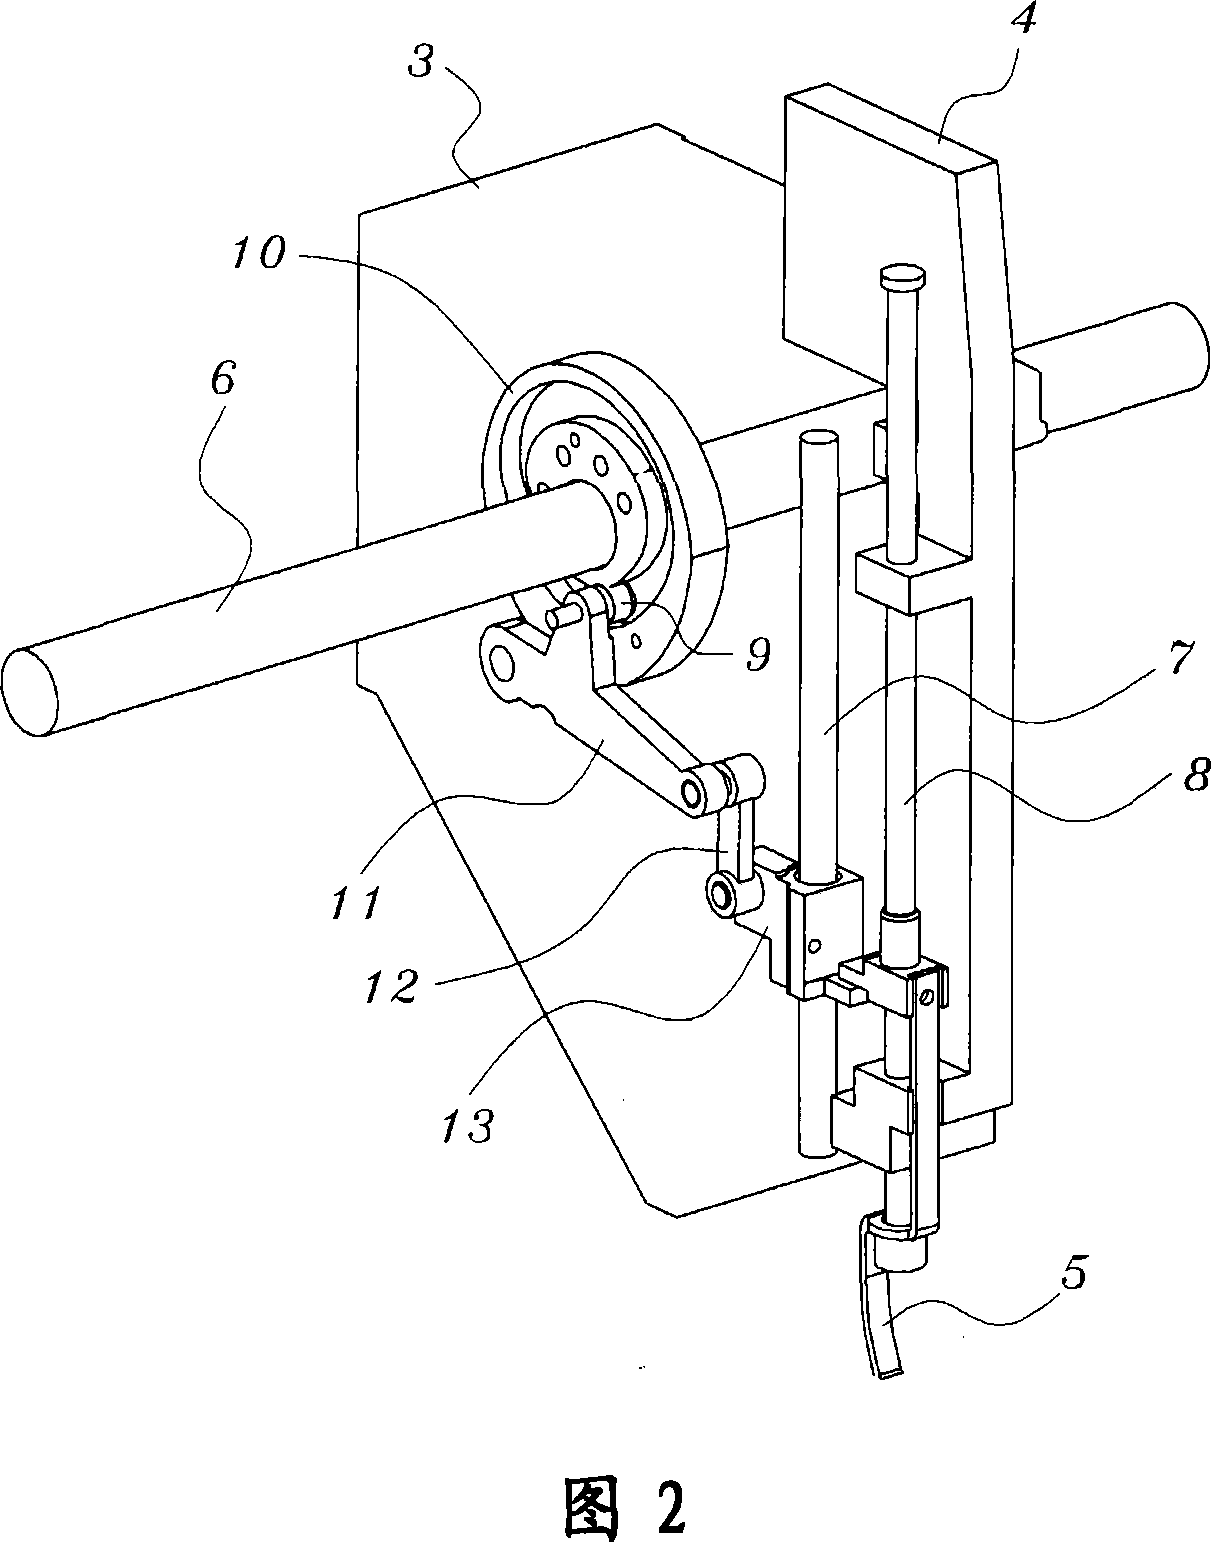 Device for lifting presser foot of embroidering machine